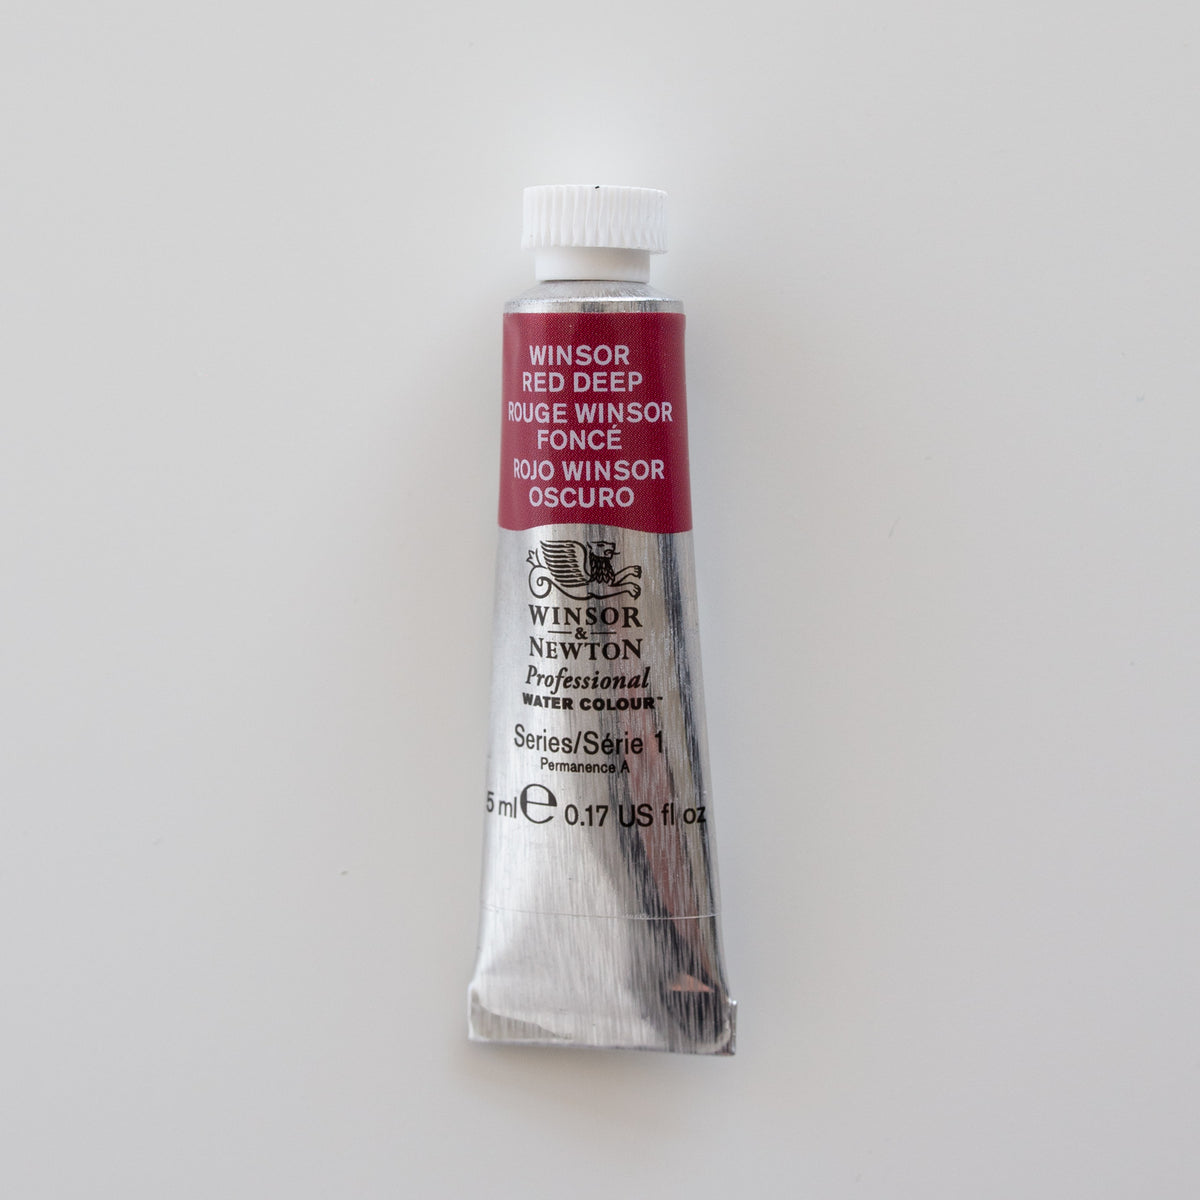 Winsor & Newton Professional Water Colours 5ml Winsor Red Deep 1